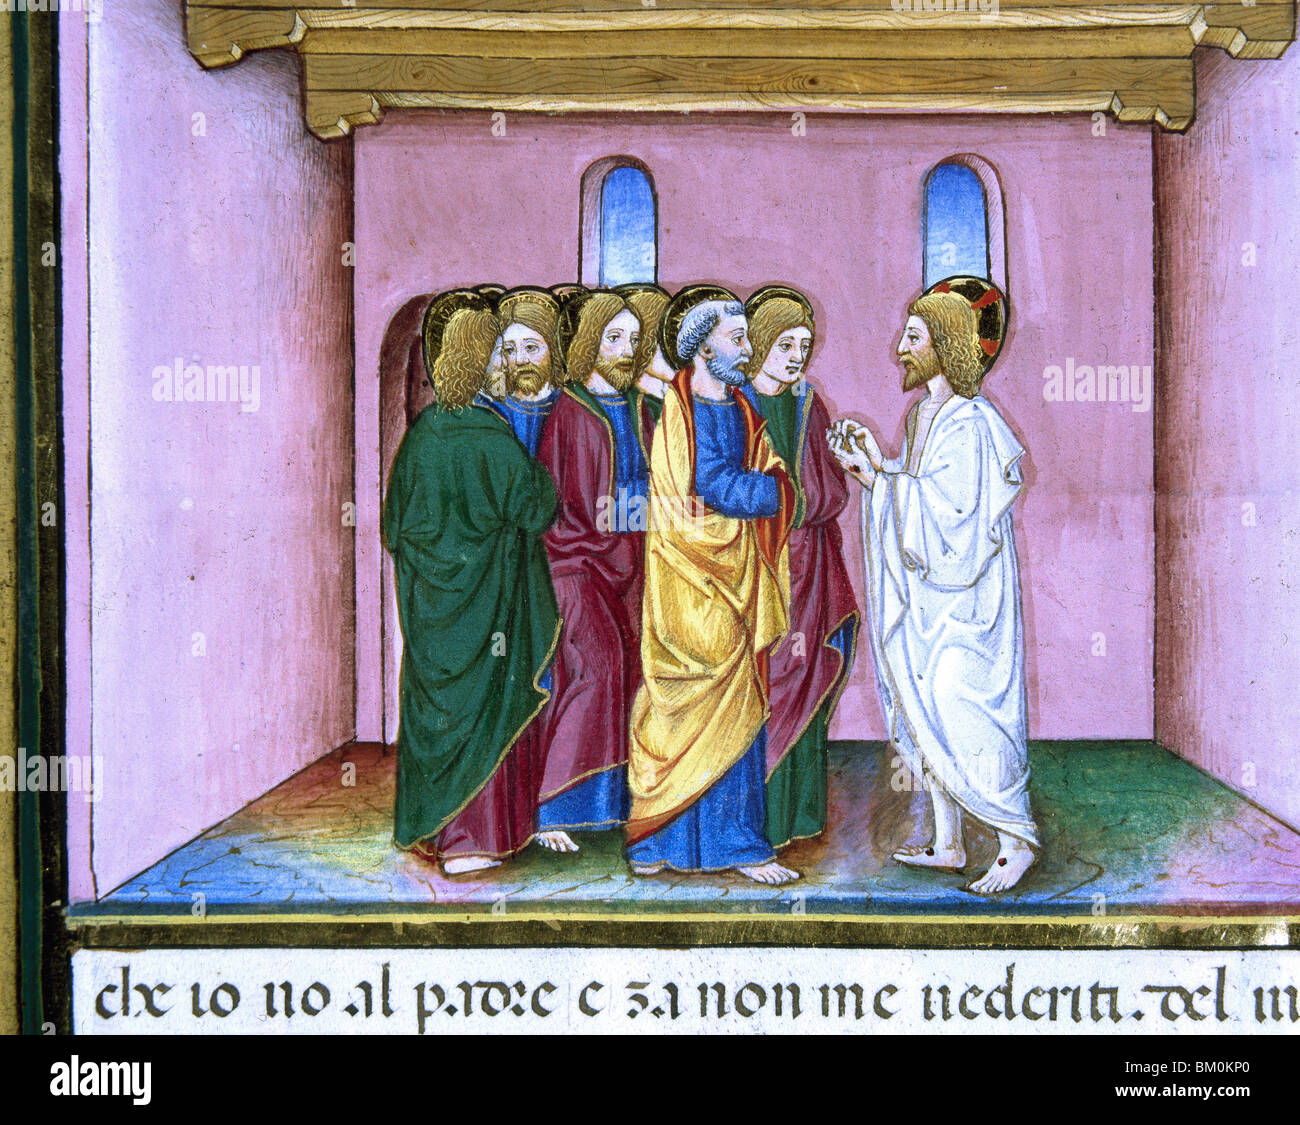 Risen Jesus announces to the disciples the coming of the Holy Spirit. Codex of Predis (1476). Royal Library. Turin. Italy. Stock Photo